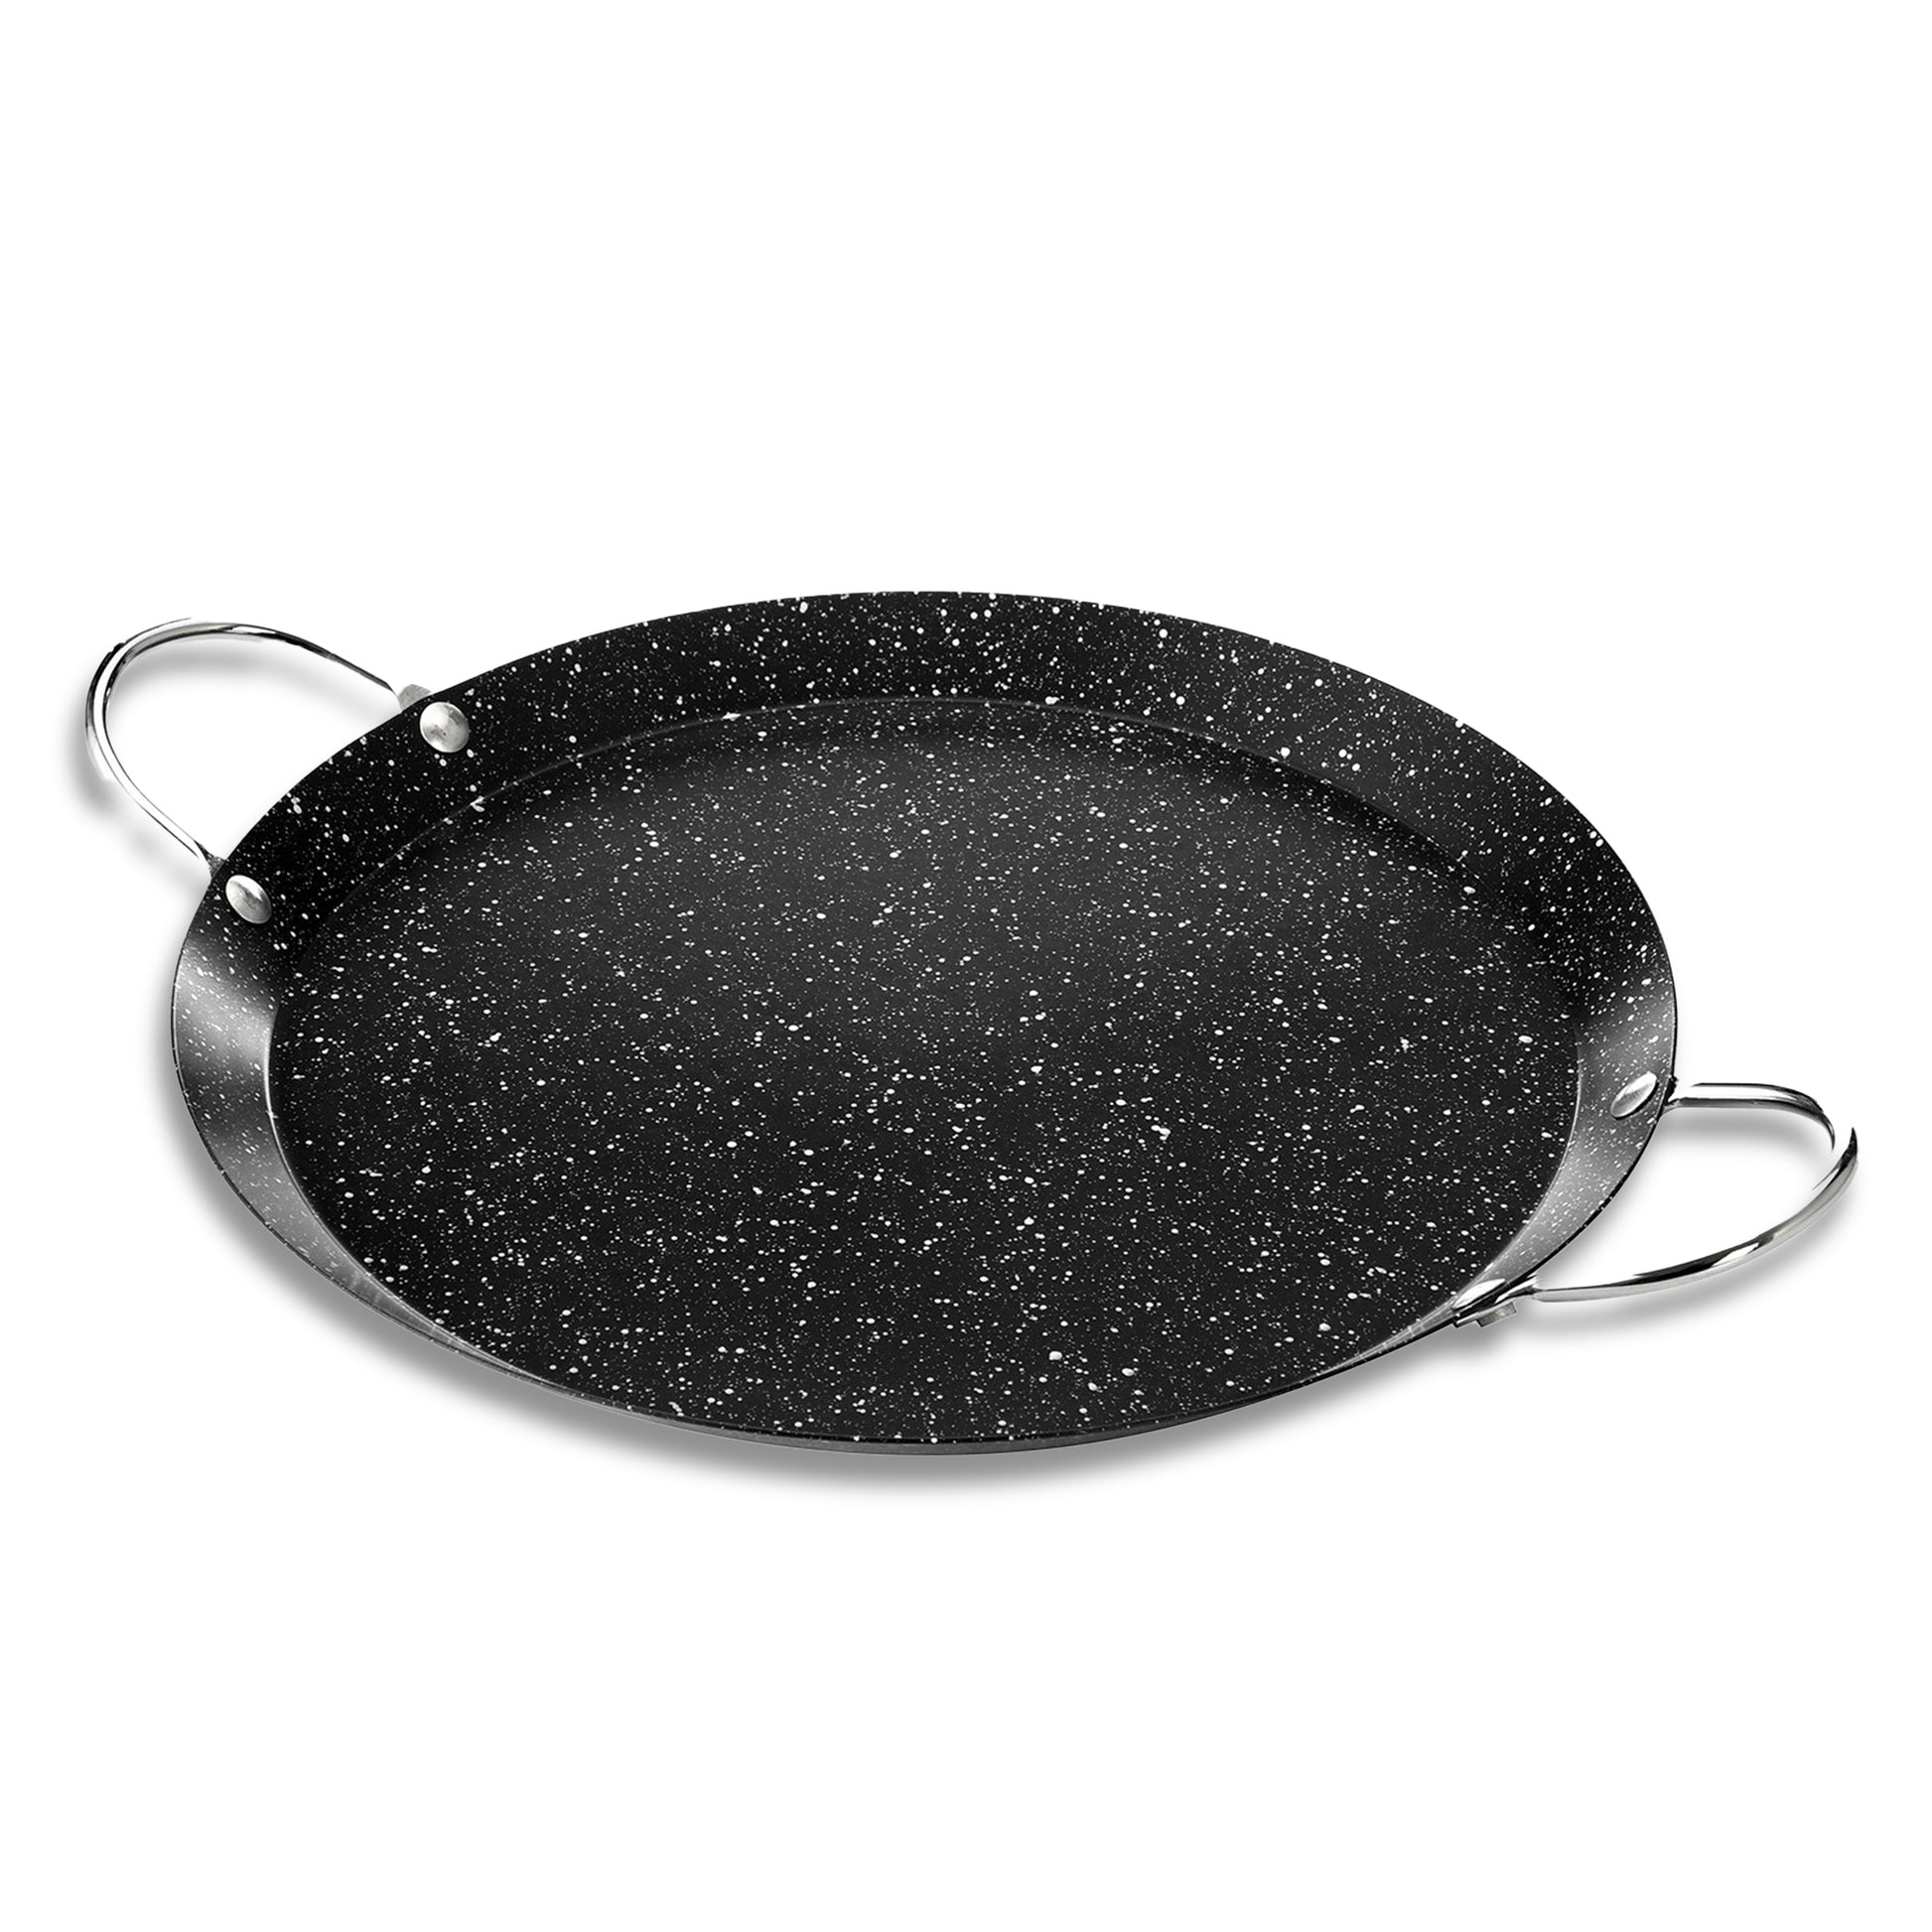  Alpine Cuisine Round Comal Griddle 14-Inch - Black Carbon Steel  Tortilla Comal with Double Handle - Durable, Heavy Duty Comal for Cooking -  Even-Heating: Home & Kitchen